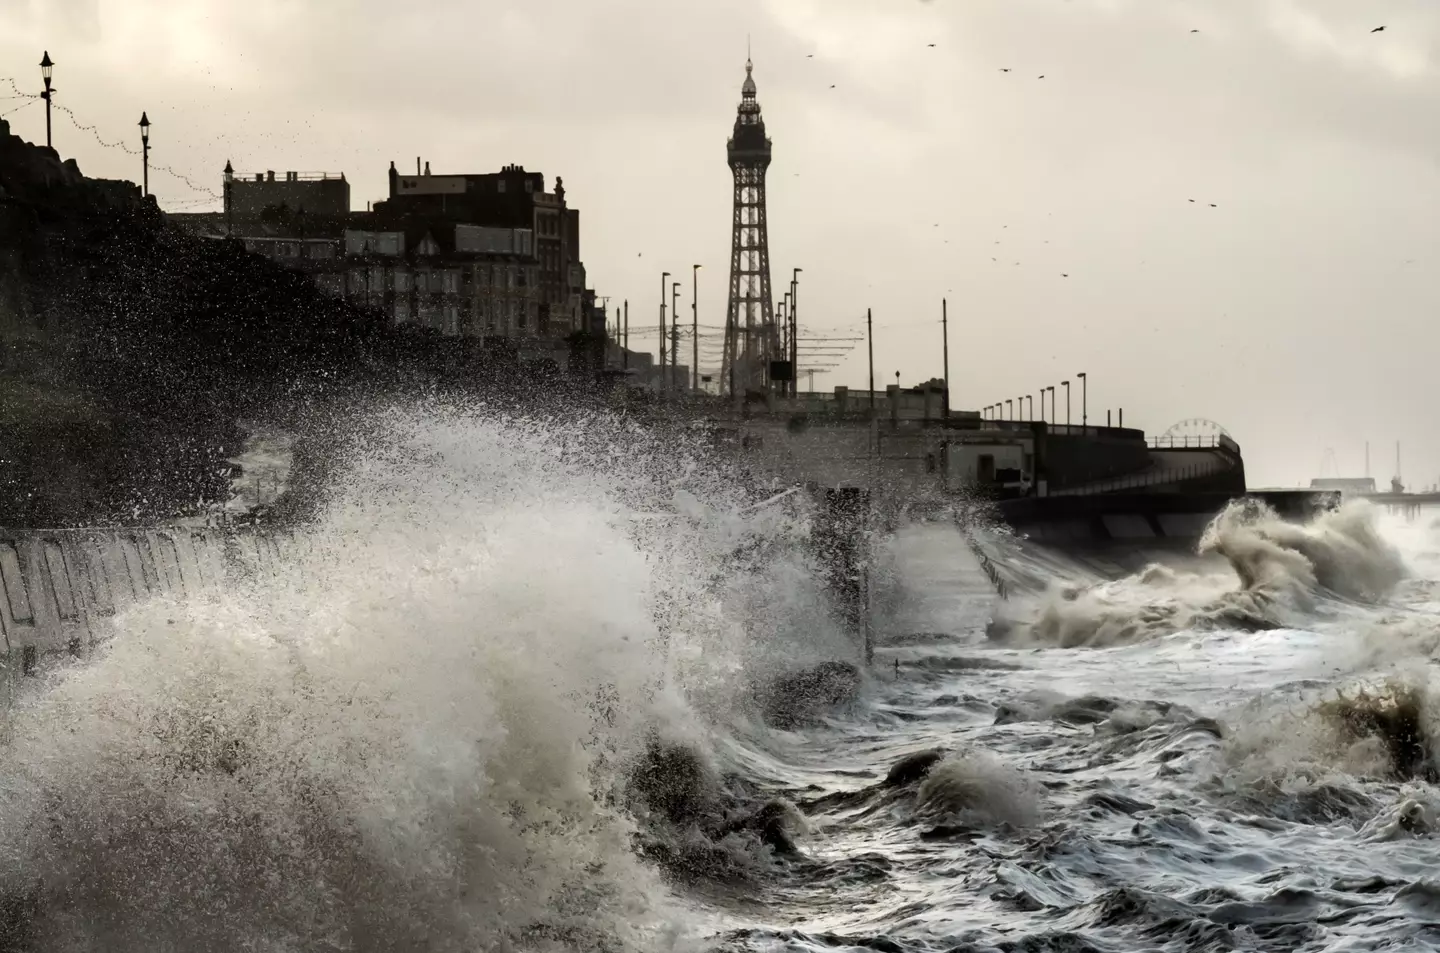 Waves break on the sea front in Blackpool.